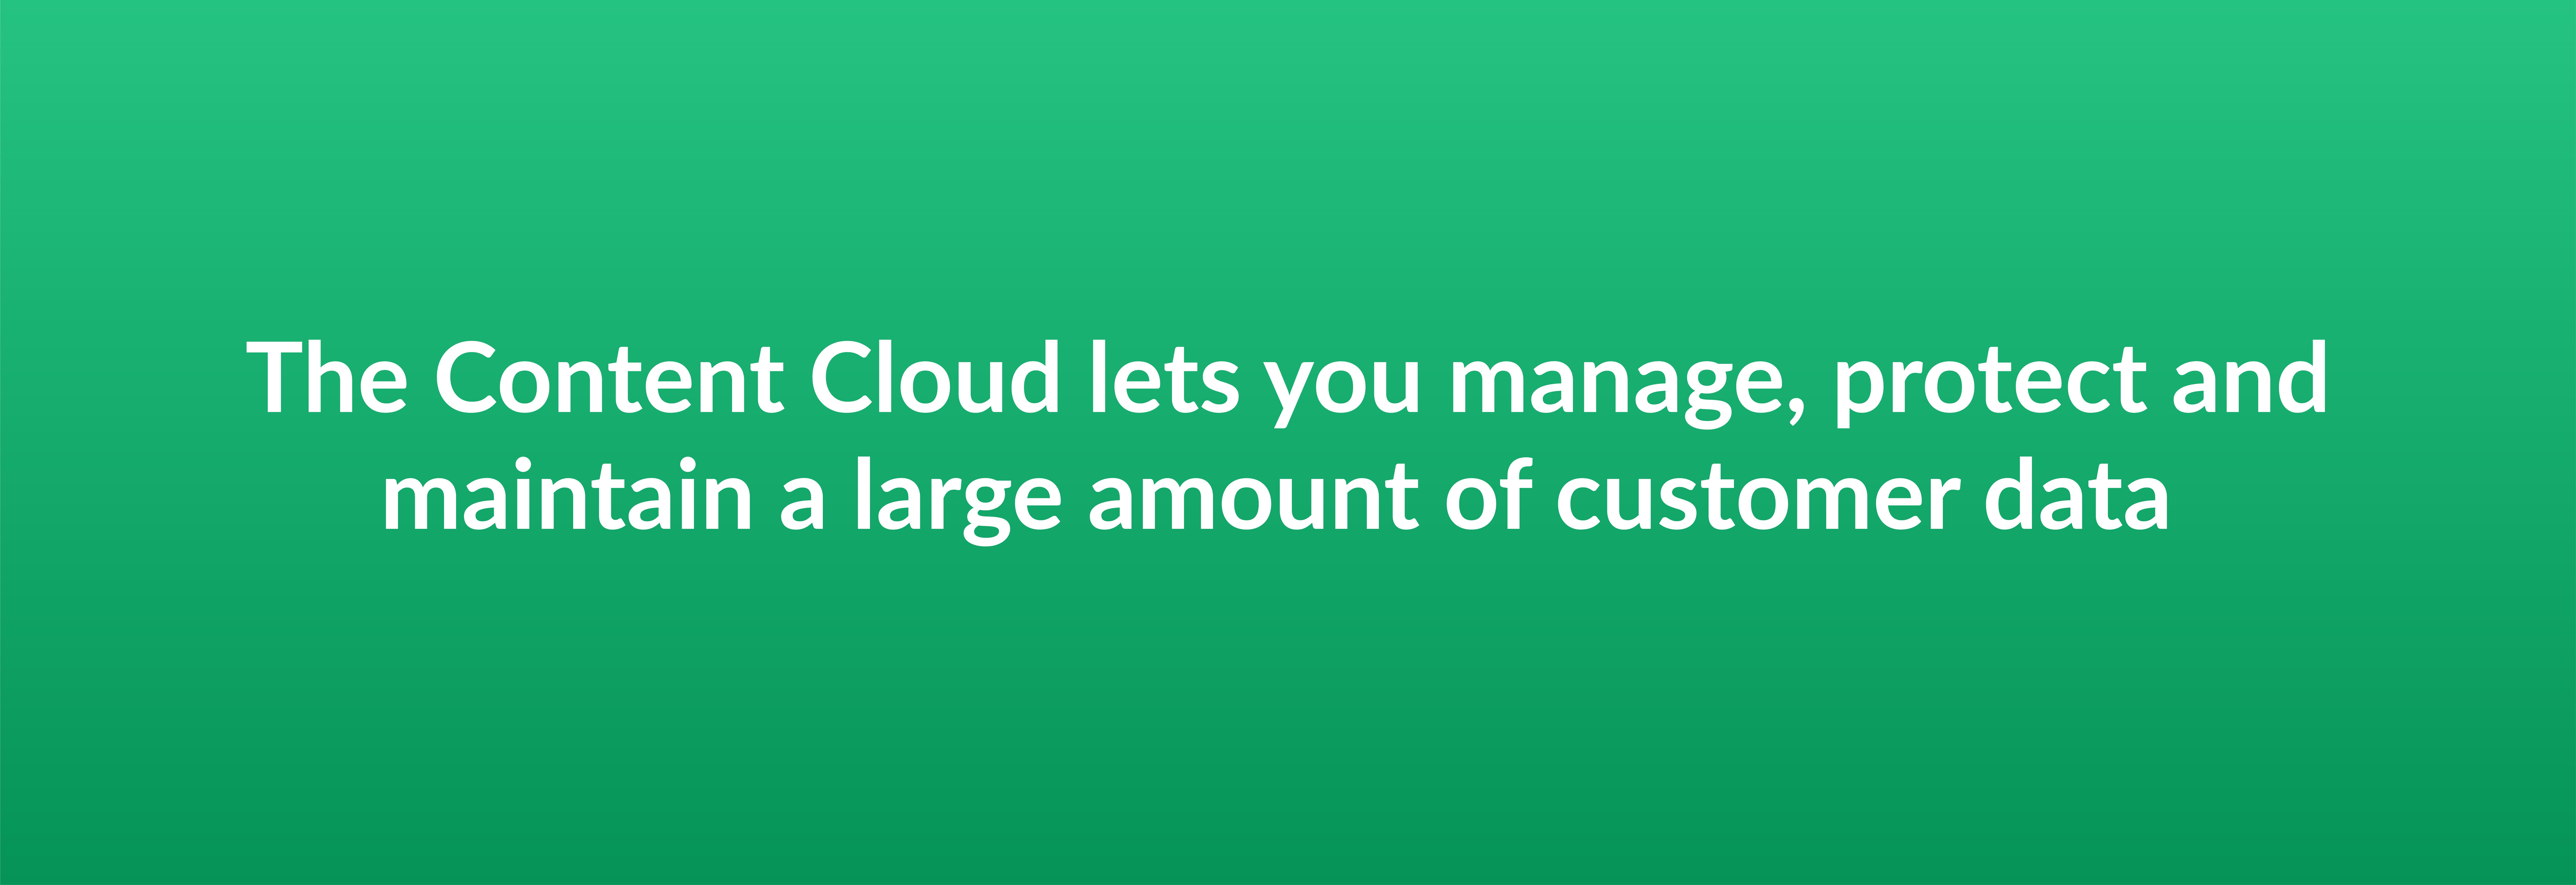 The Content Cloud lets you manage, protect and maintain a large amount of customers data